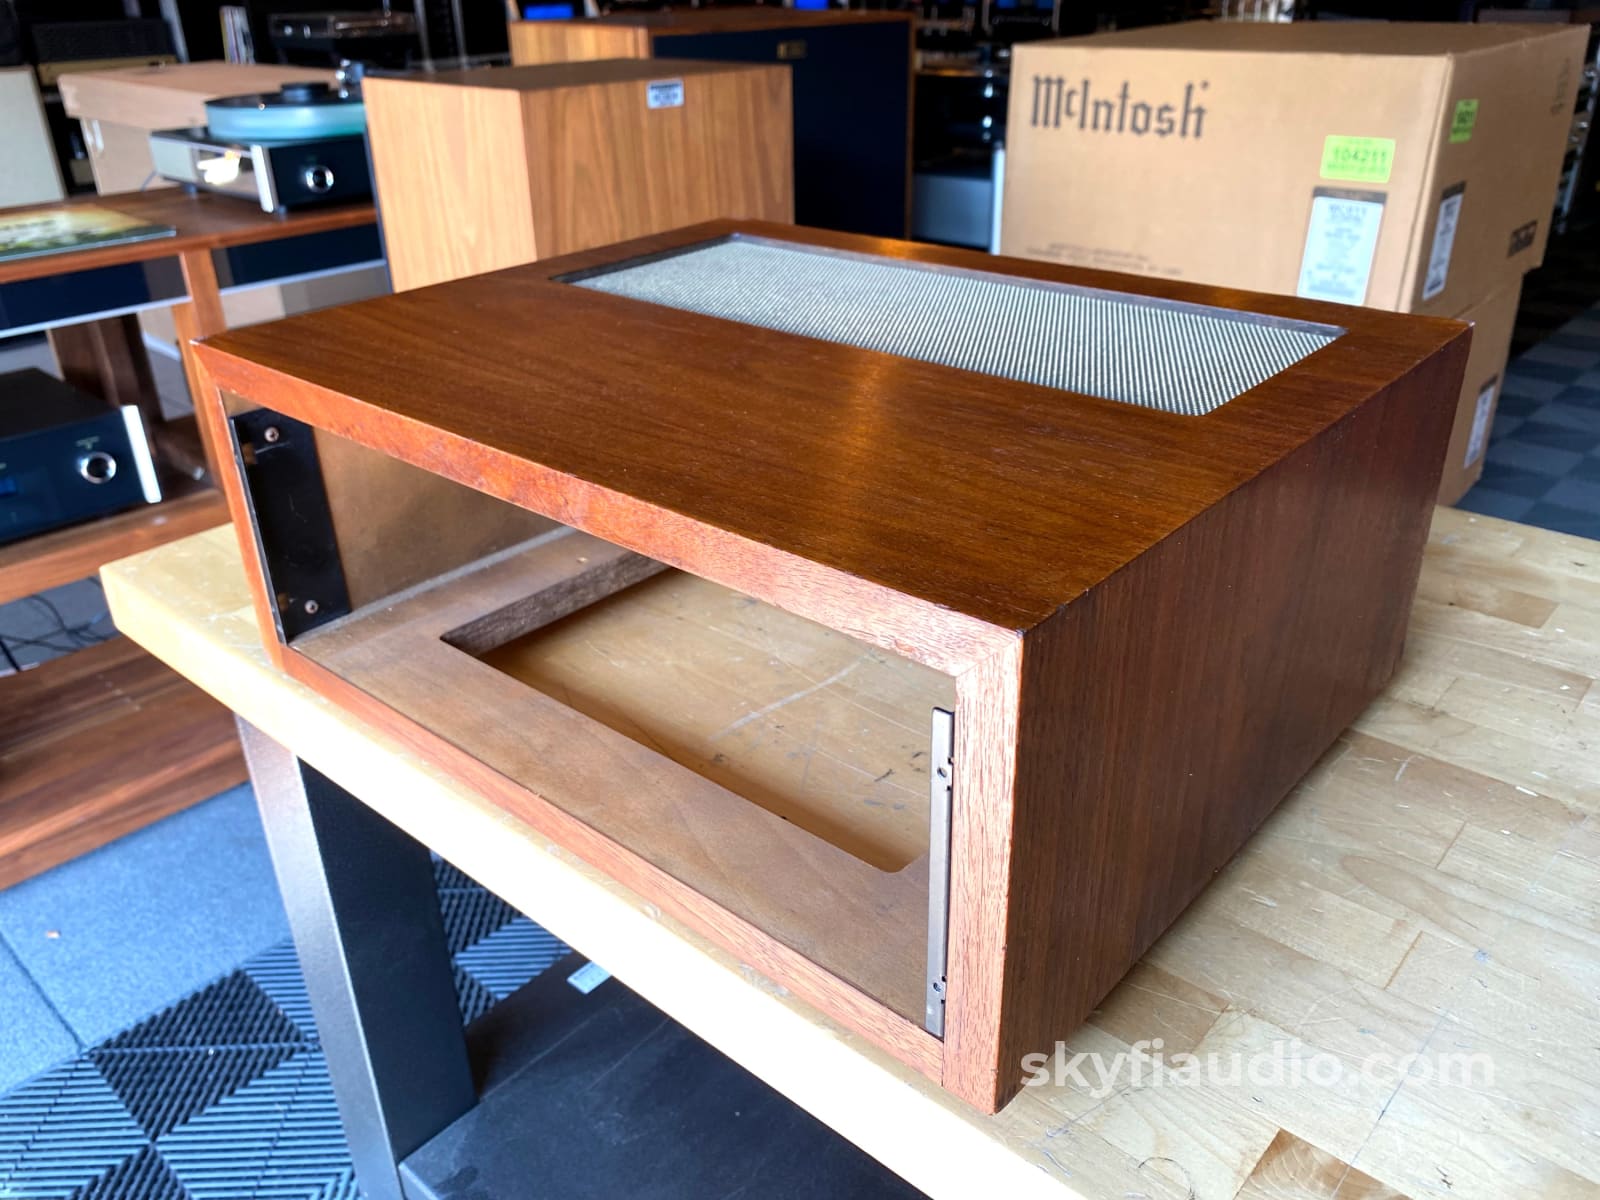 Mcintosh Early L12 Slant Foot Wood Cabinet - Fits 5 Tall Components W/Notch For C22 Tray Accessory